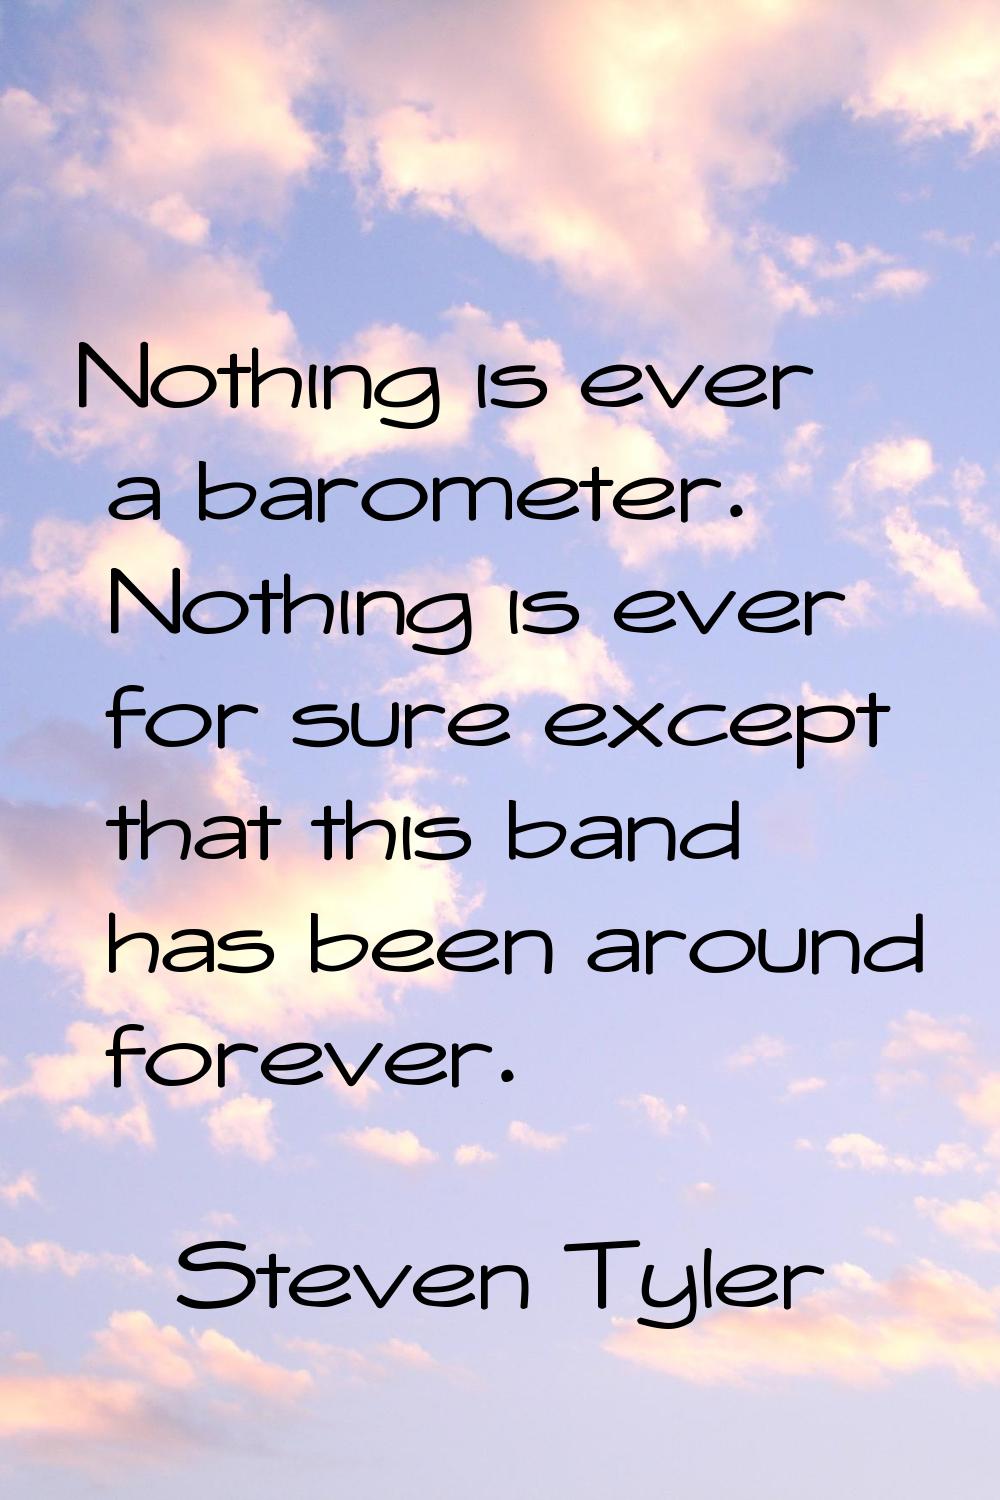 Nothing is ever a barometer. Nothing is ever for sure except that this band has been around forever